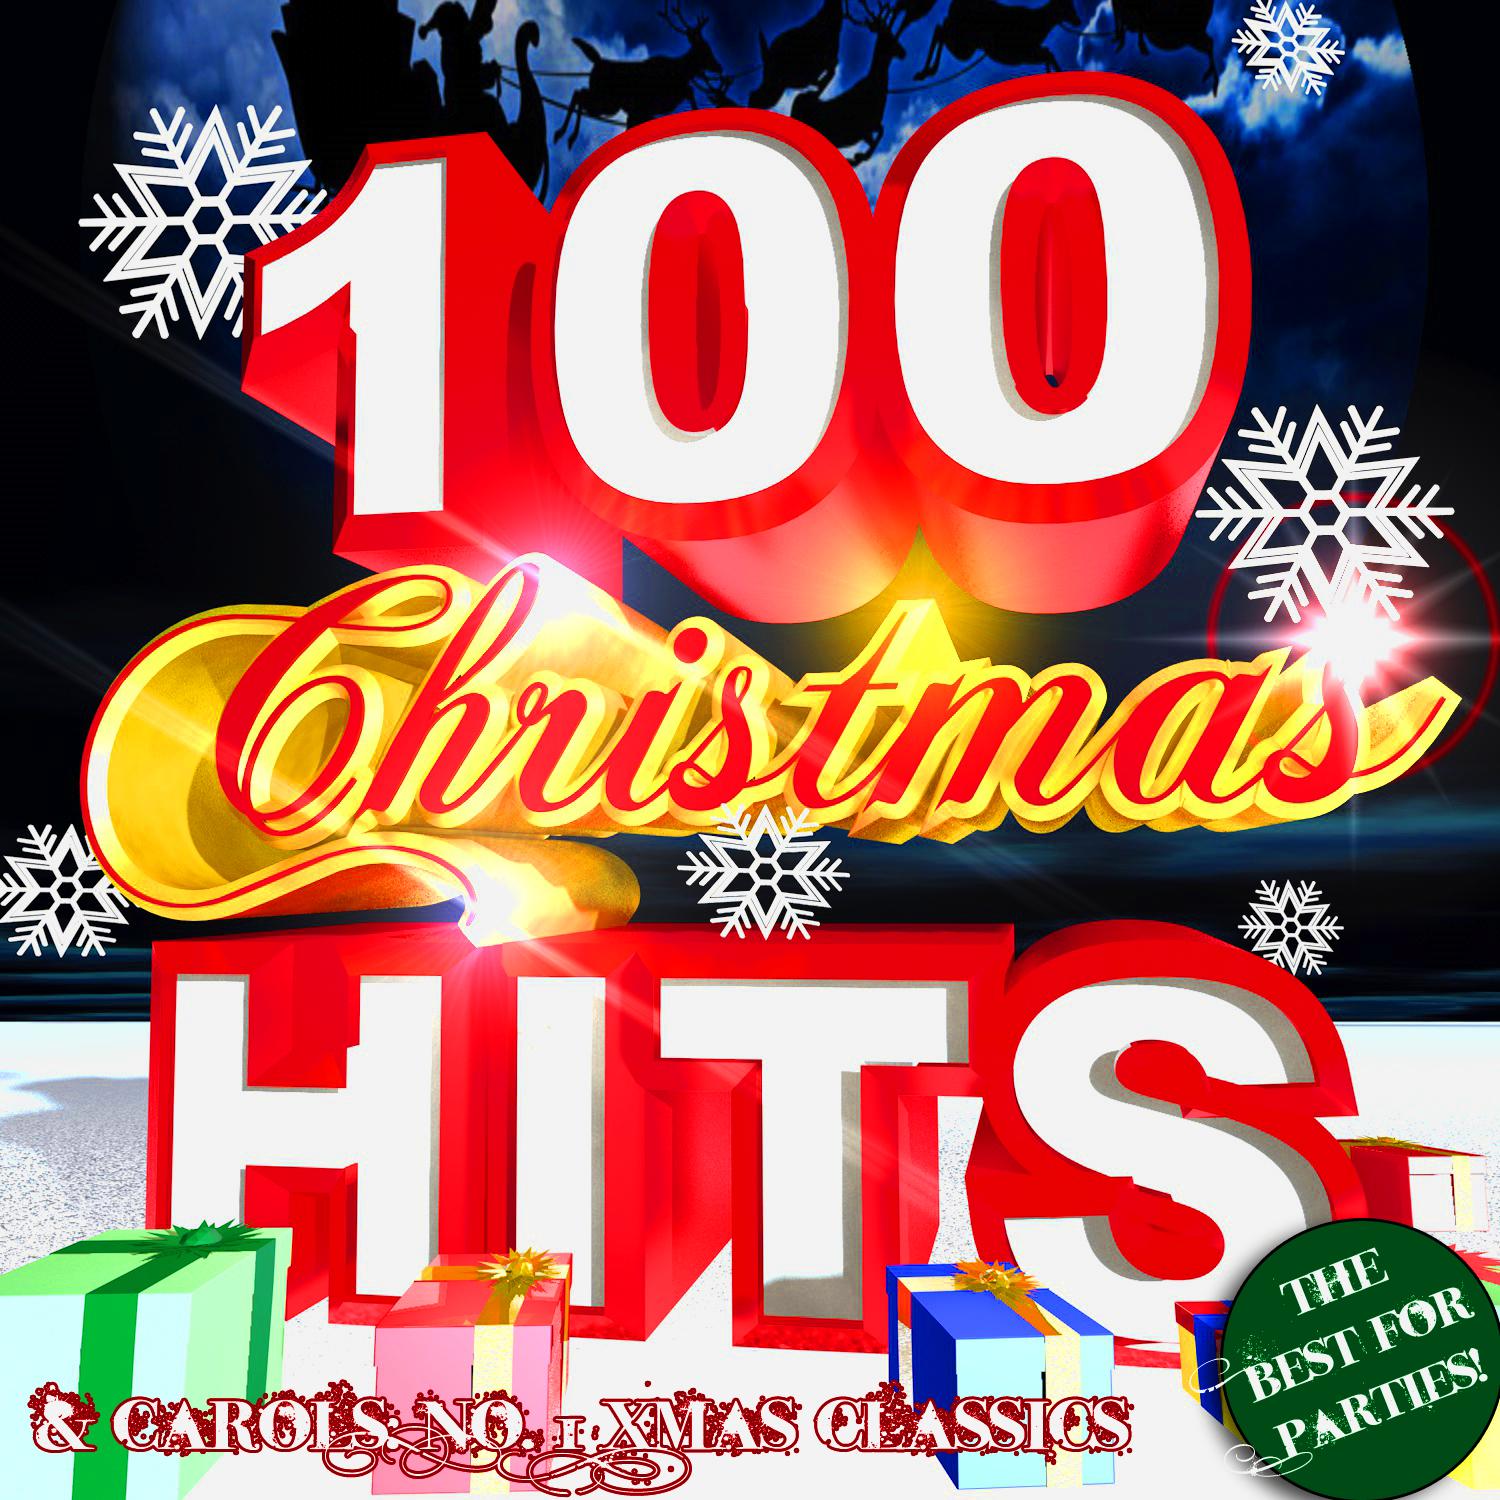 100 Christmas Hits & Carols: No. 1 Xmas Classics - The Best for Parties